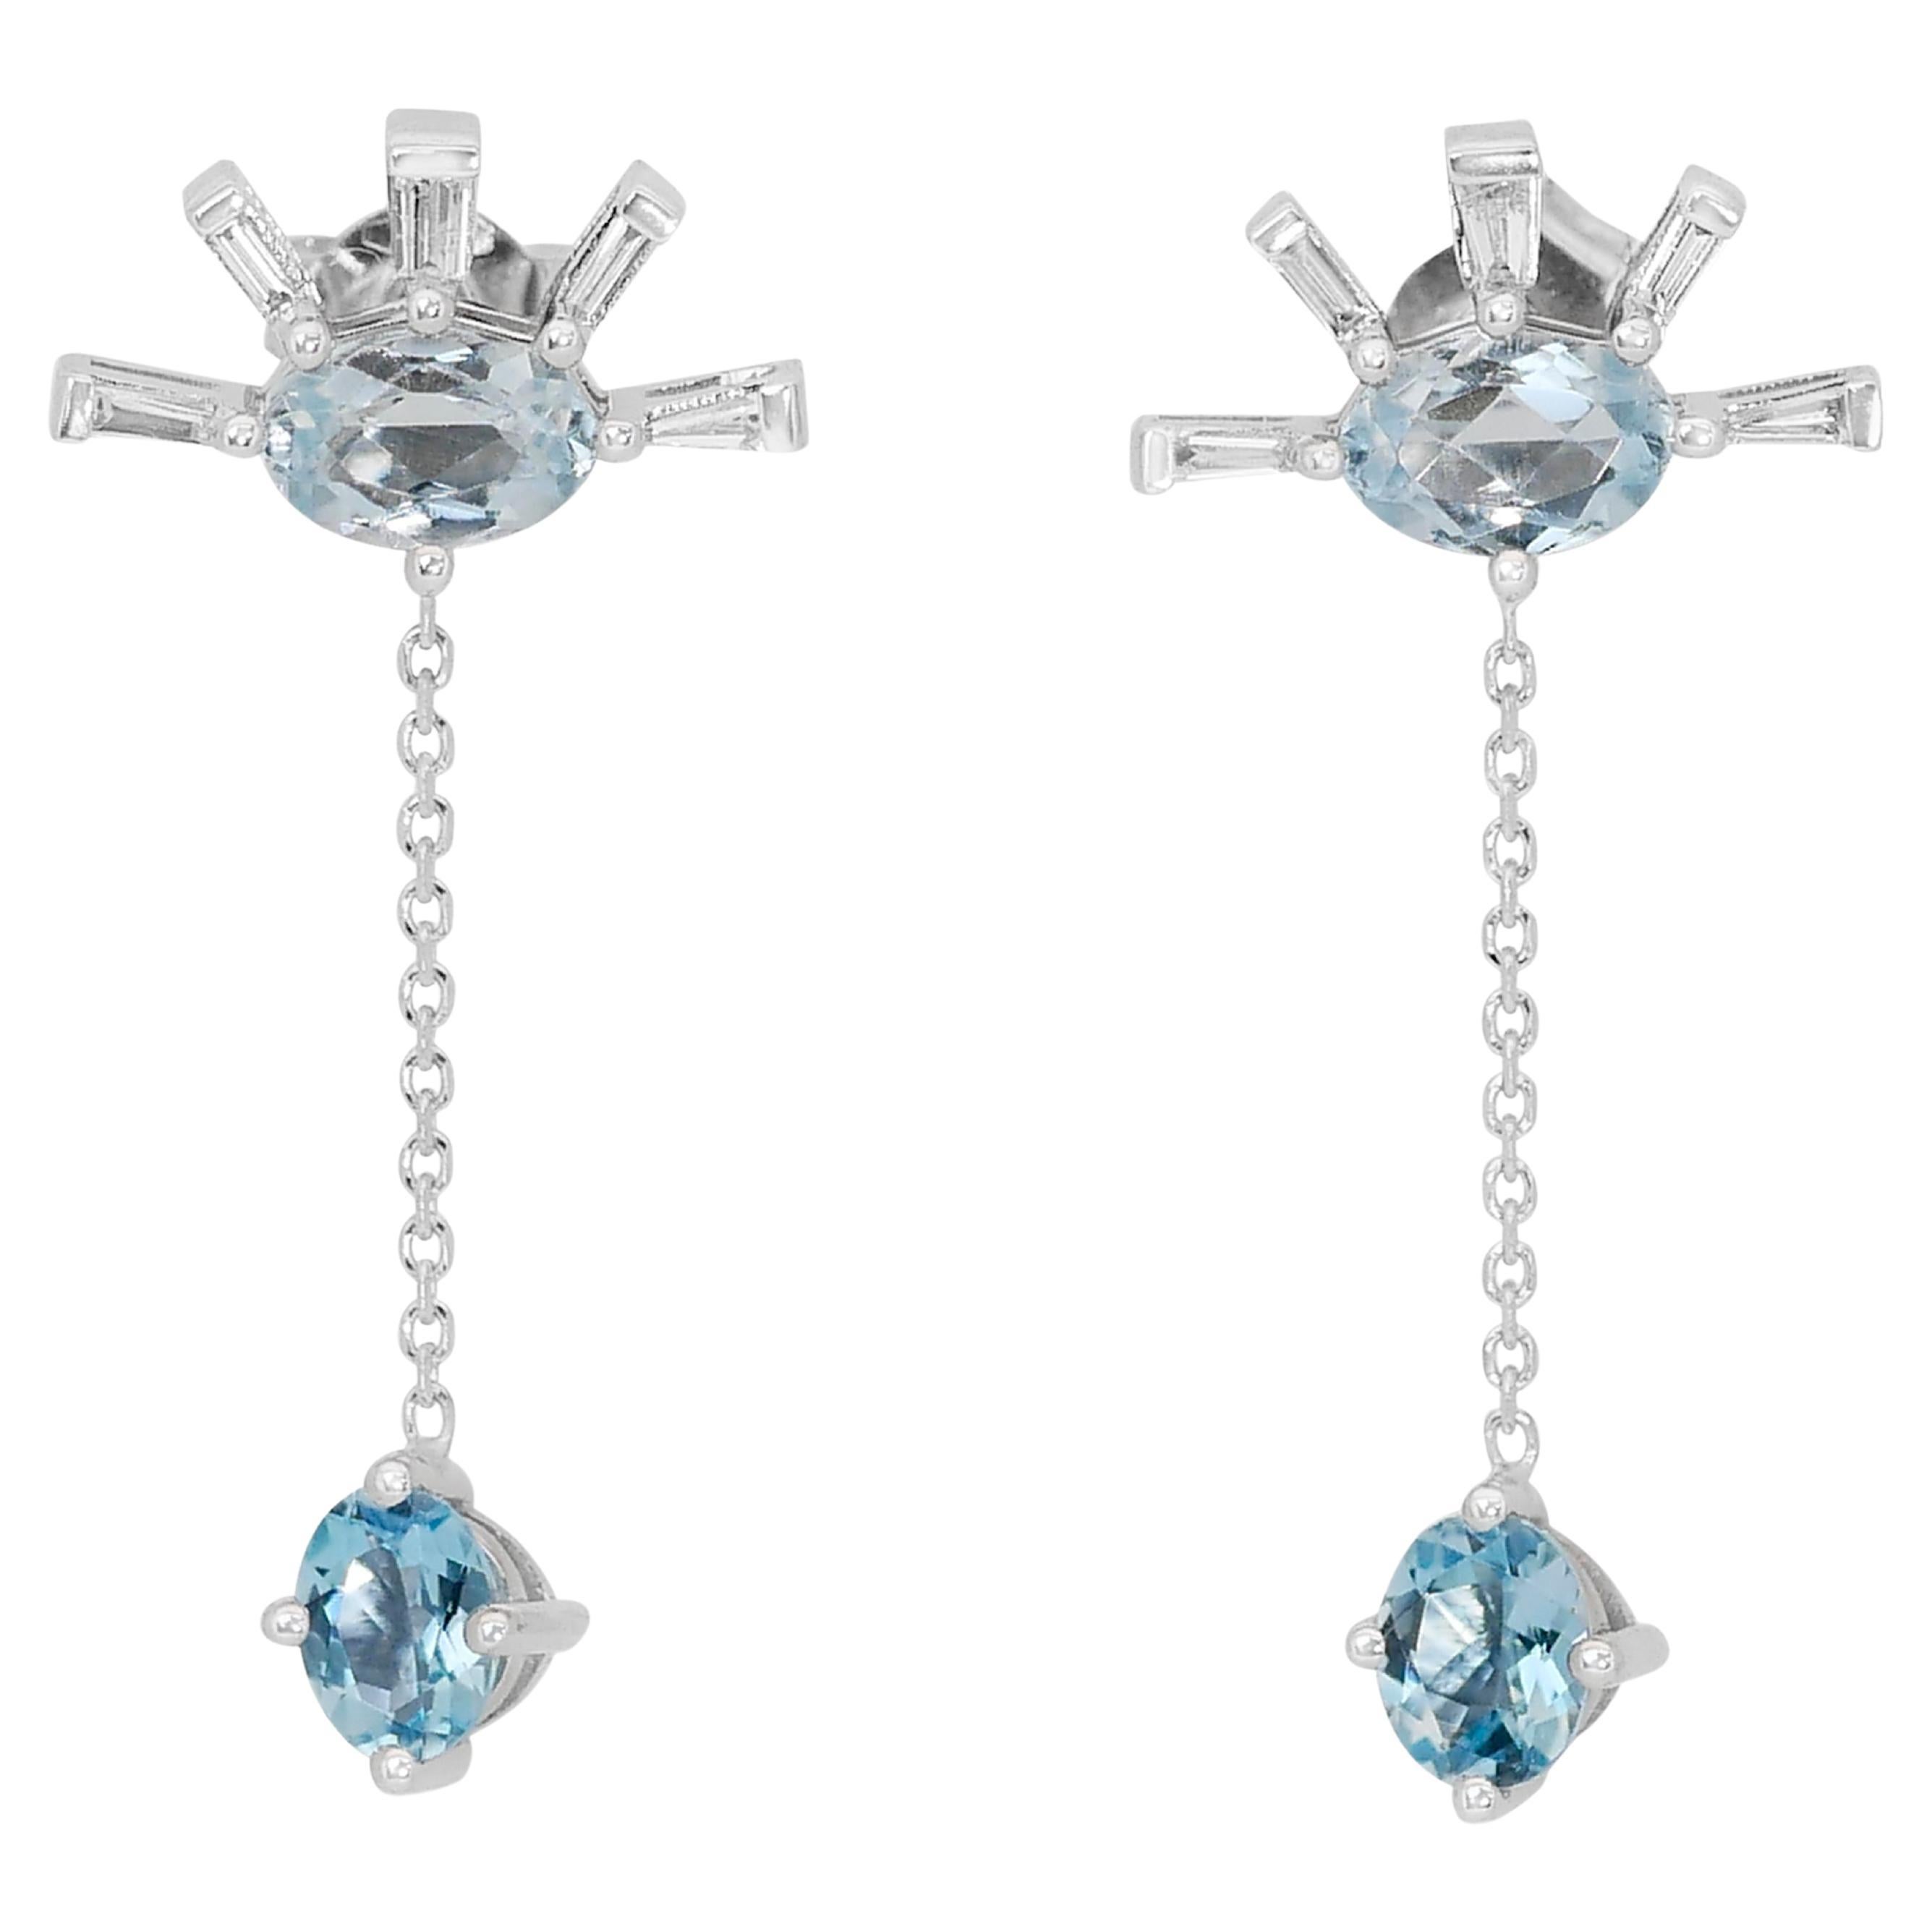 Serene 14k White Gold Blue Topaz and Diamond Drop Earrings w/2.12 ct - IGI Certified   

Introducing the Serene Blue Topaz and Diamond Elegance, a pair of 14k White Gold Dangling Earrings. The main stones are 2 light blue Topaz of 1.20 ct,